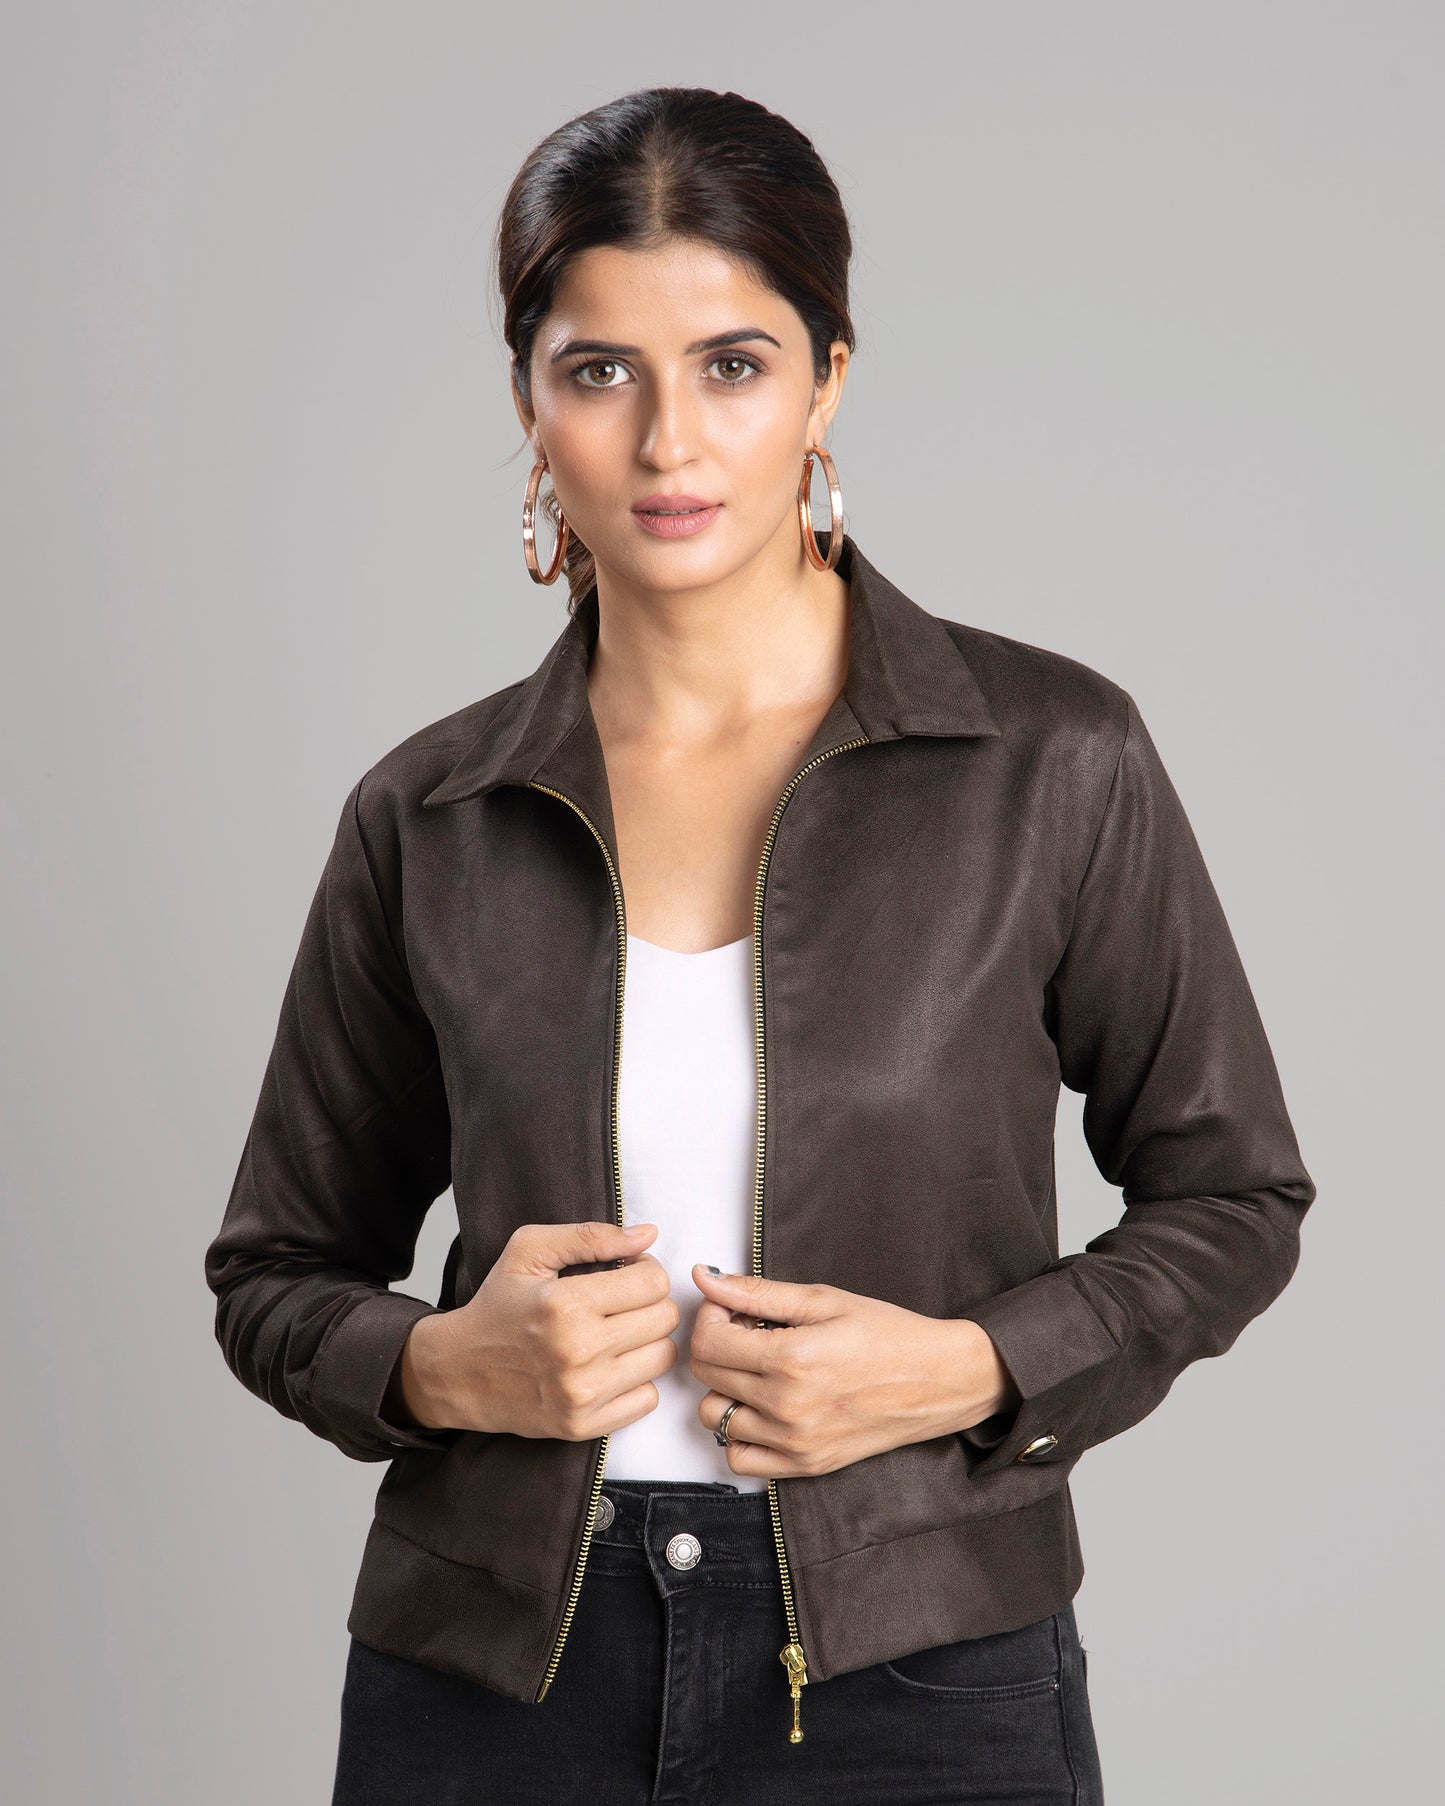 Exclusive Luxurious Suede Jacket For Women